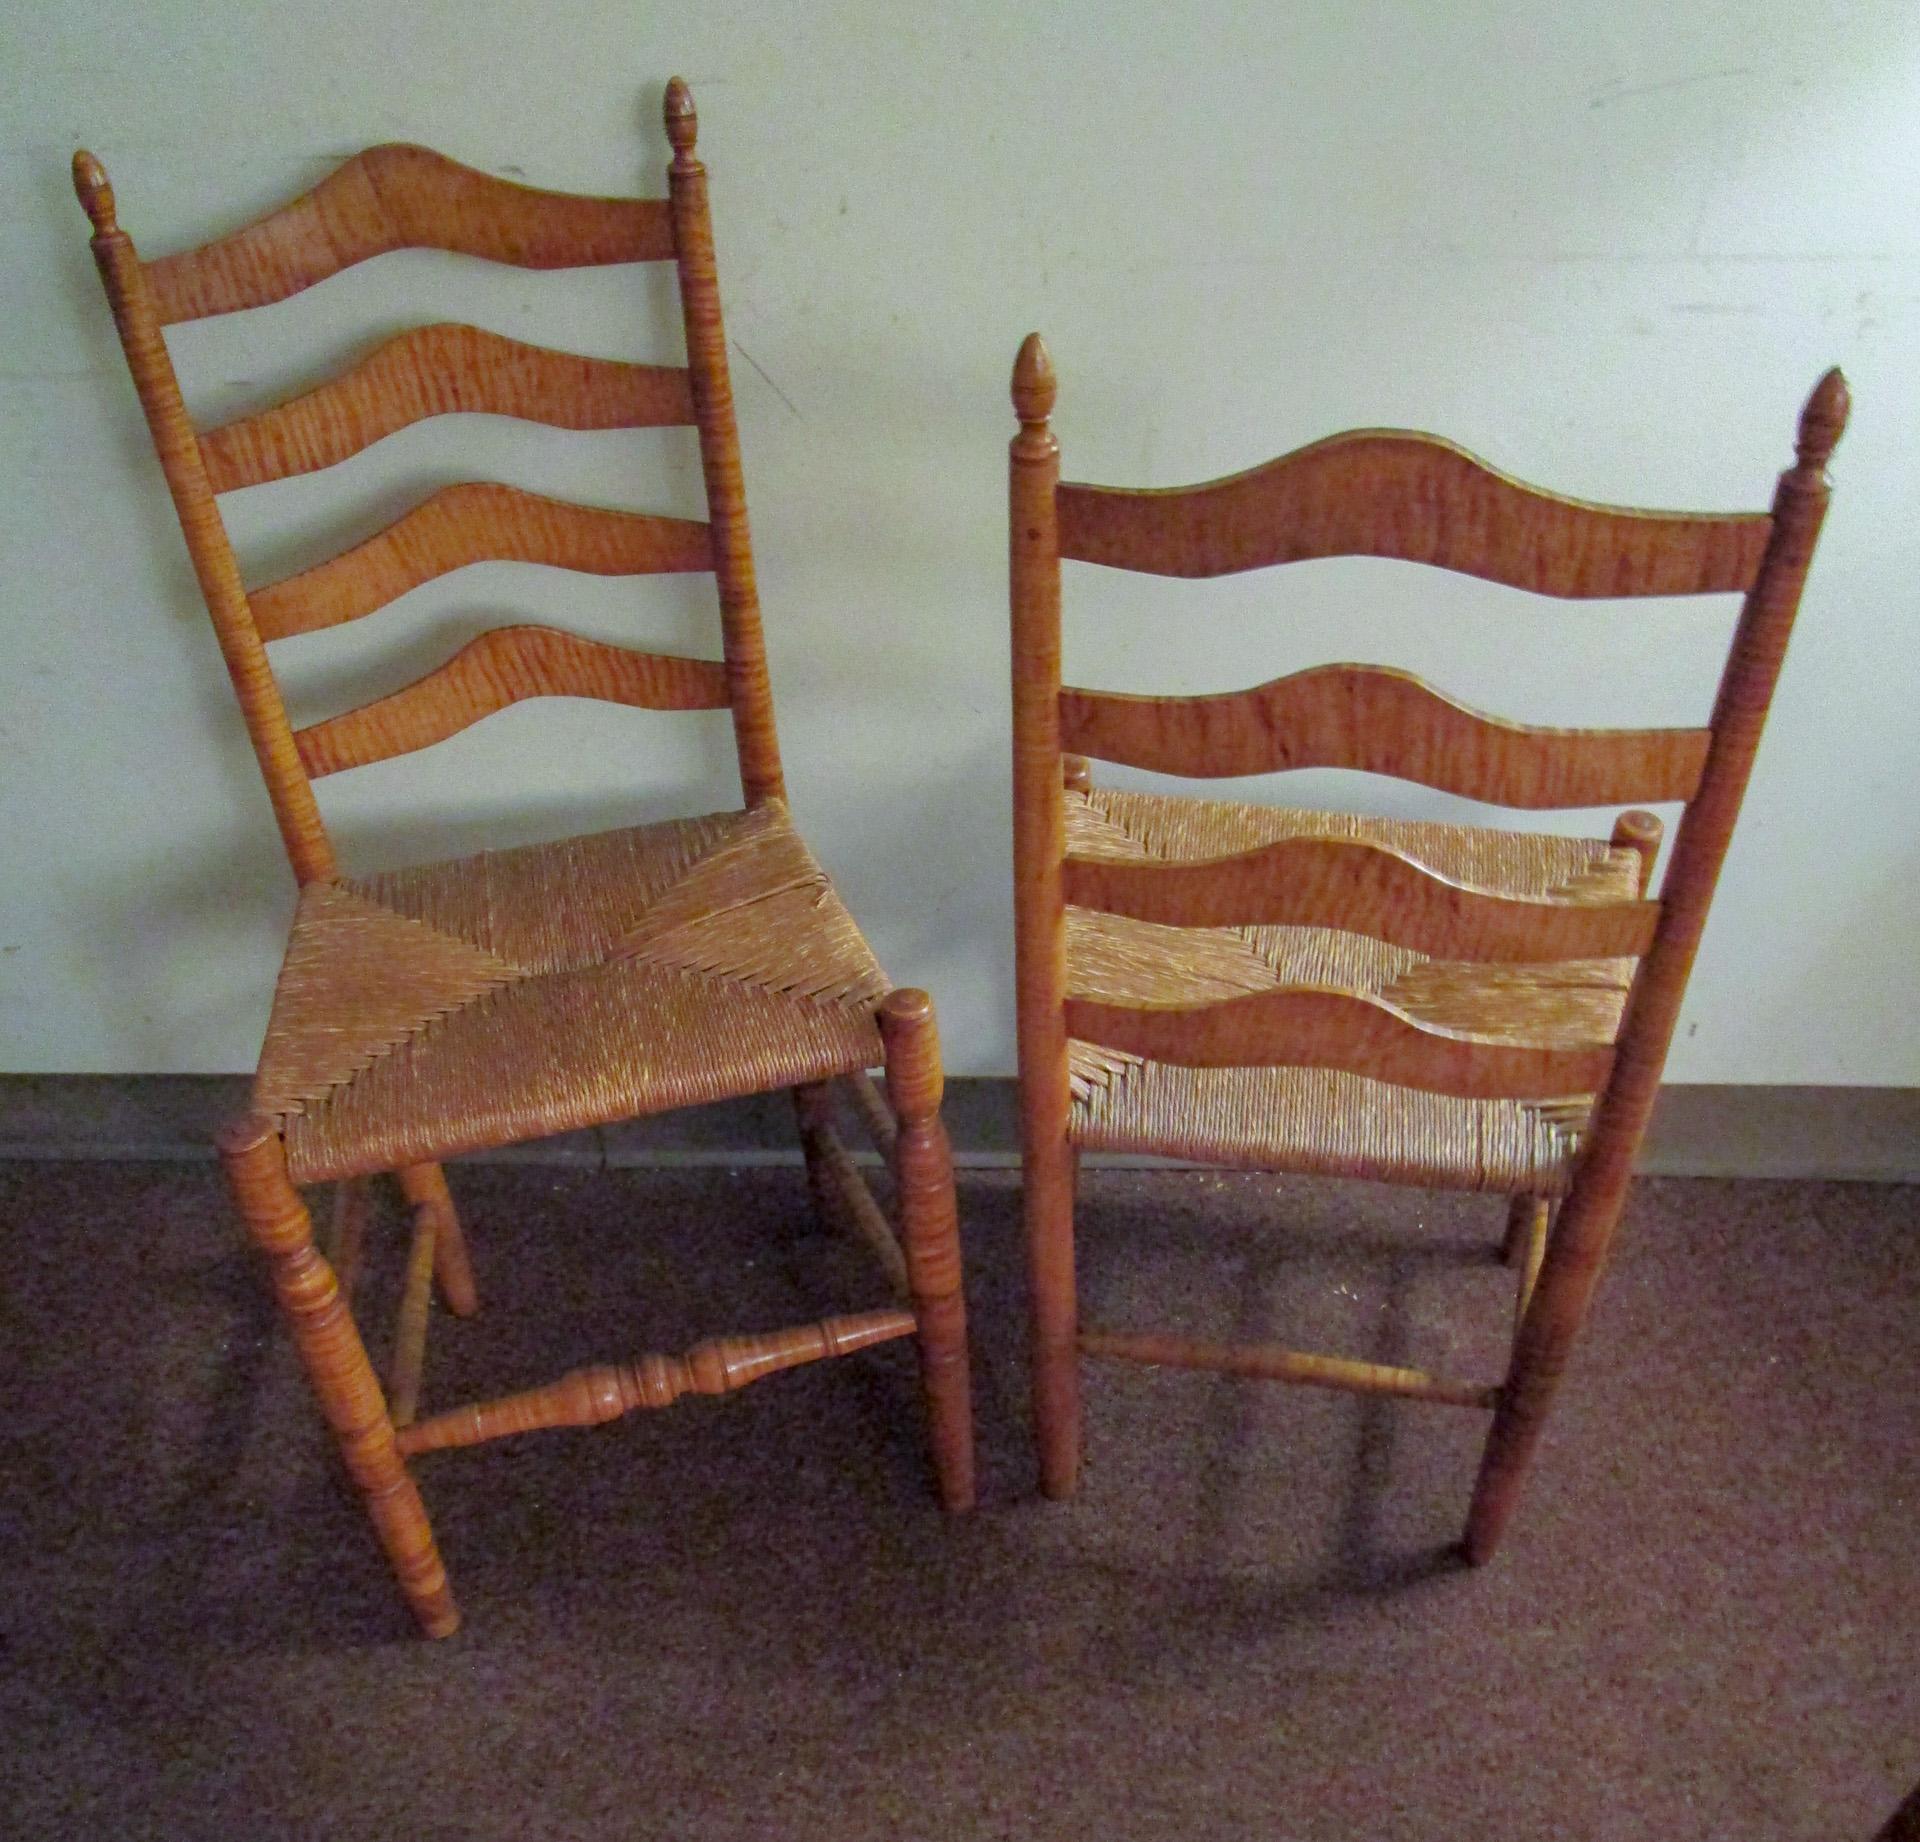  Dining Table and Four Chairs w/ Rush Seats Early 19thc American Tiger Maple In Good Condition For Sale In Savannah, GA